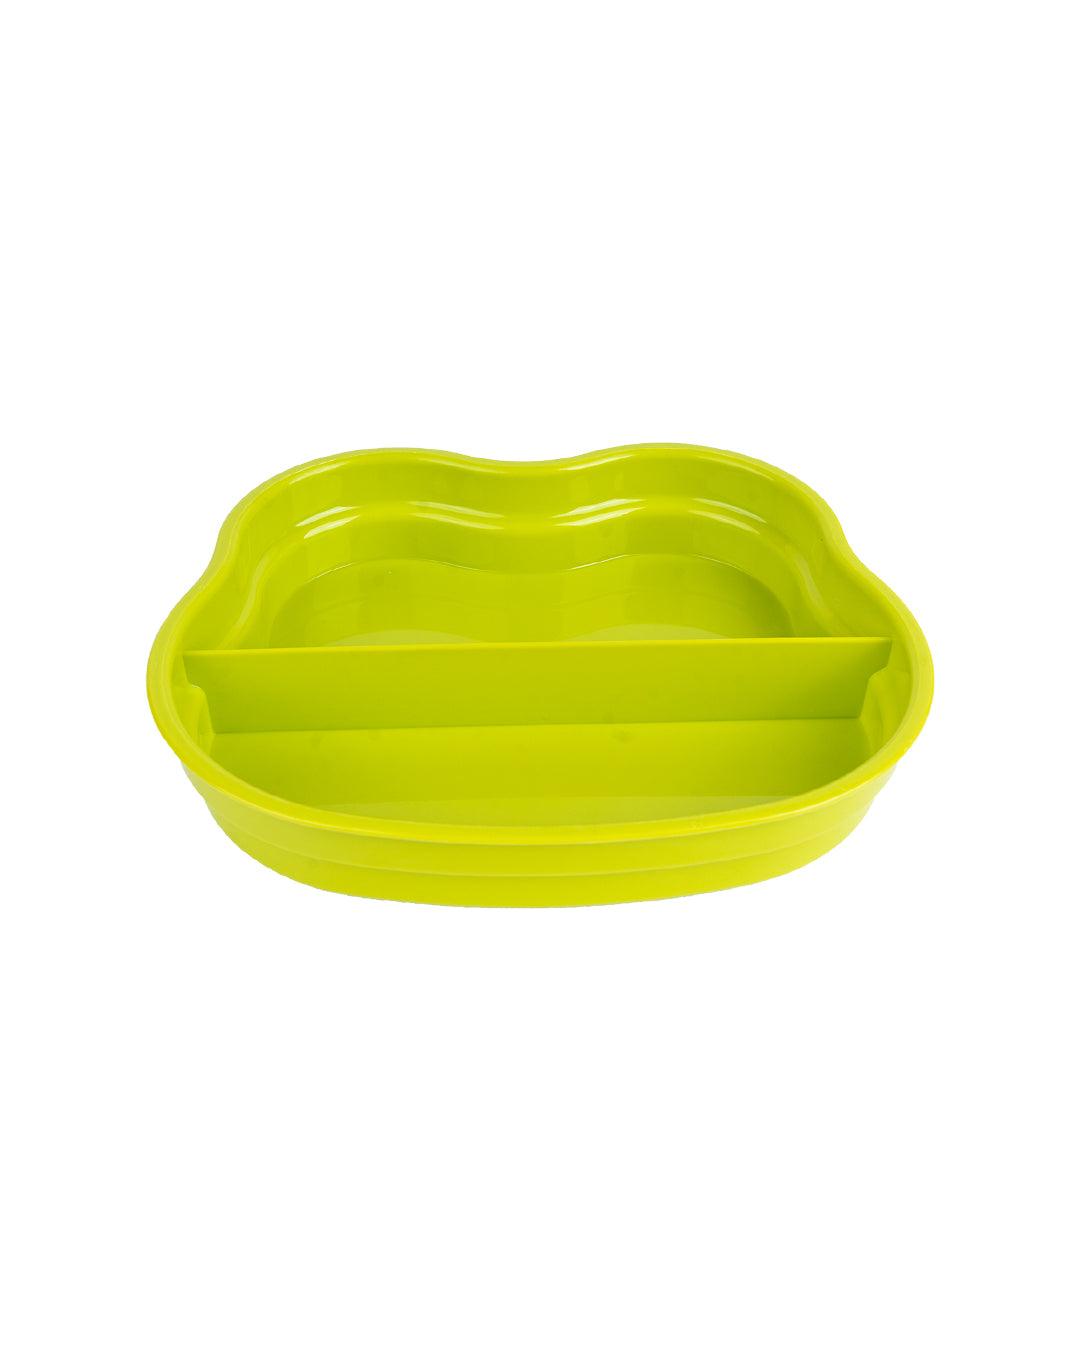 Lunch Box for Kids With Spoon, Frog Design, Green, Plastic - MARKET 99